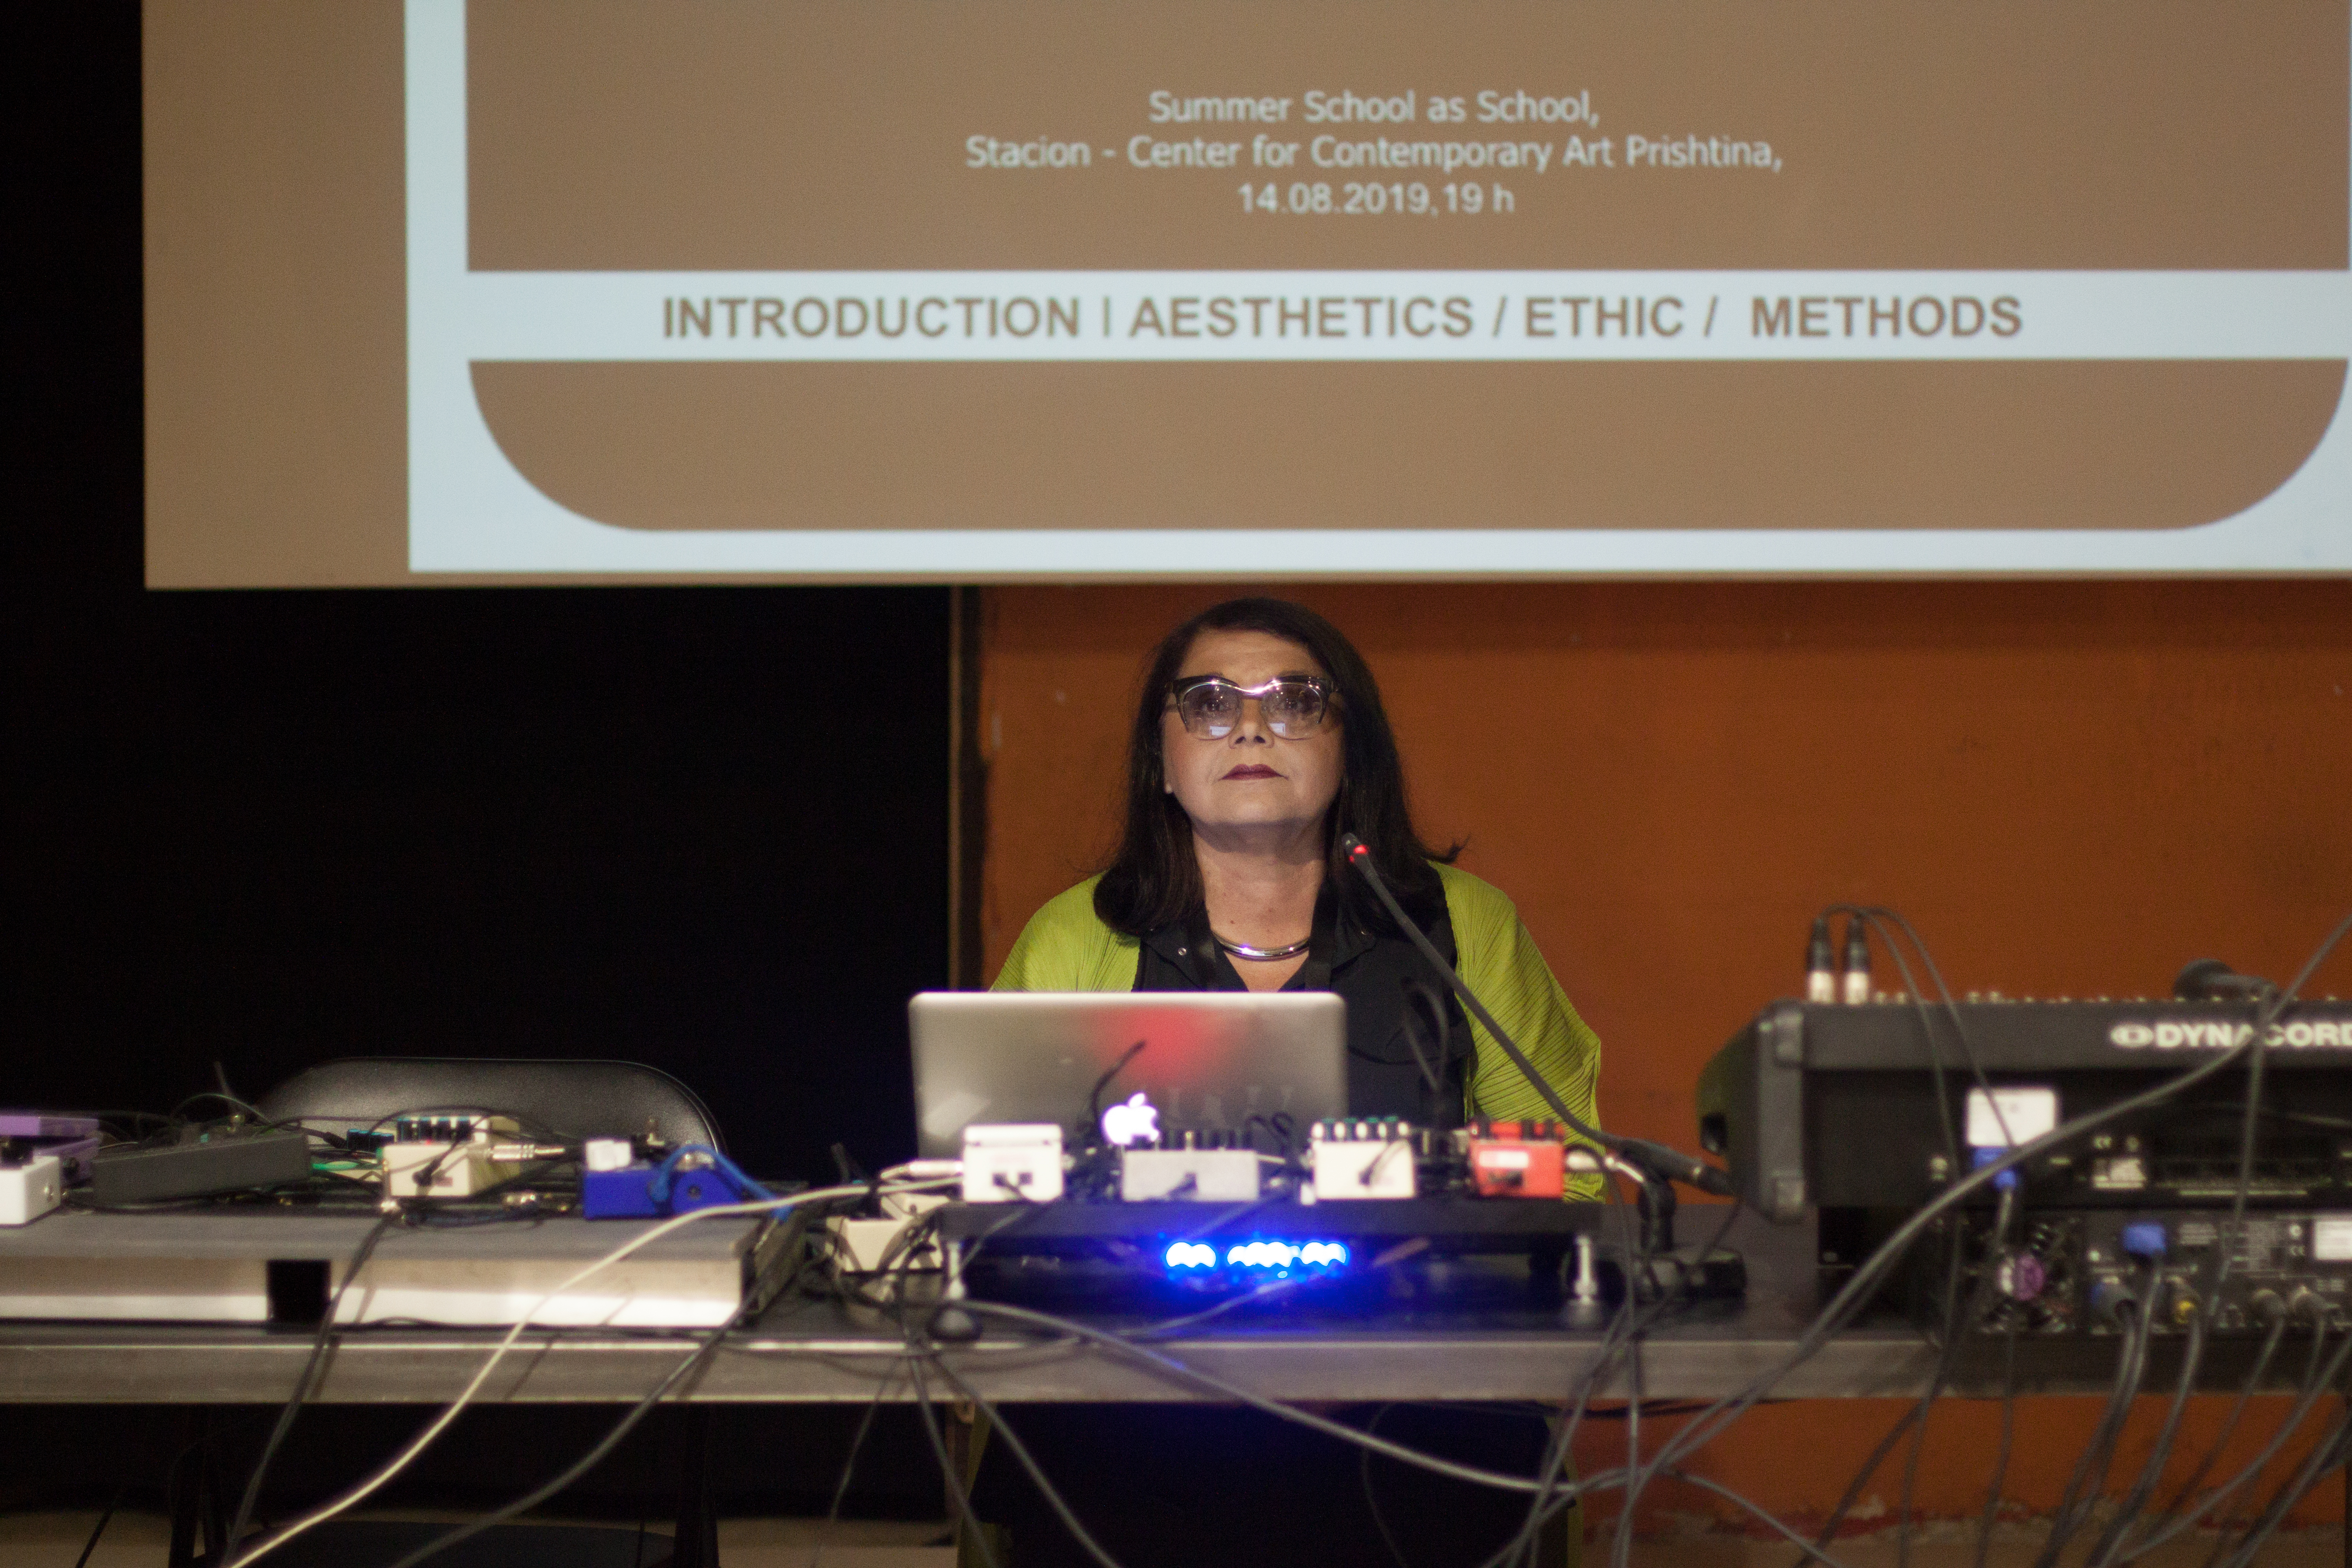 Suzana Milevska: Kalokagathia: On the Possibility to Think Together the Aesthetical and Ethical in Artistic Research